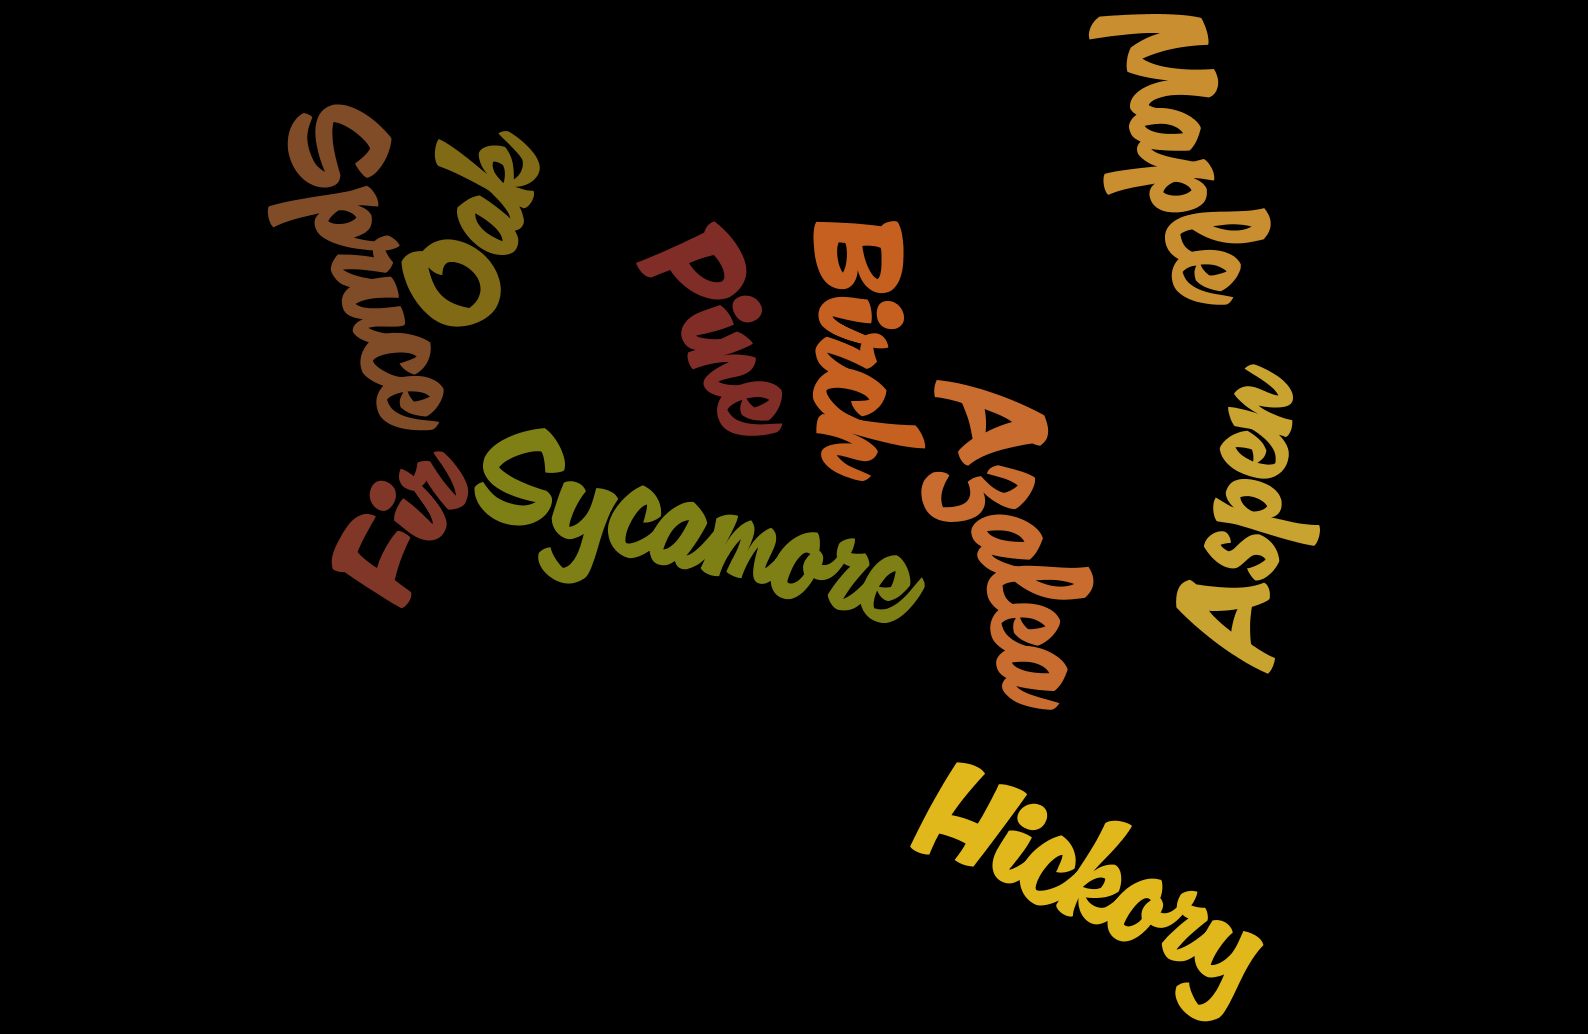 img/word_cloud_questions_3/tree_2.png